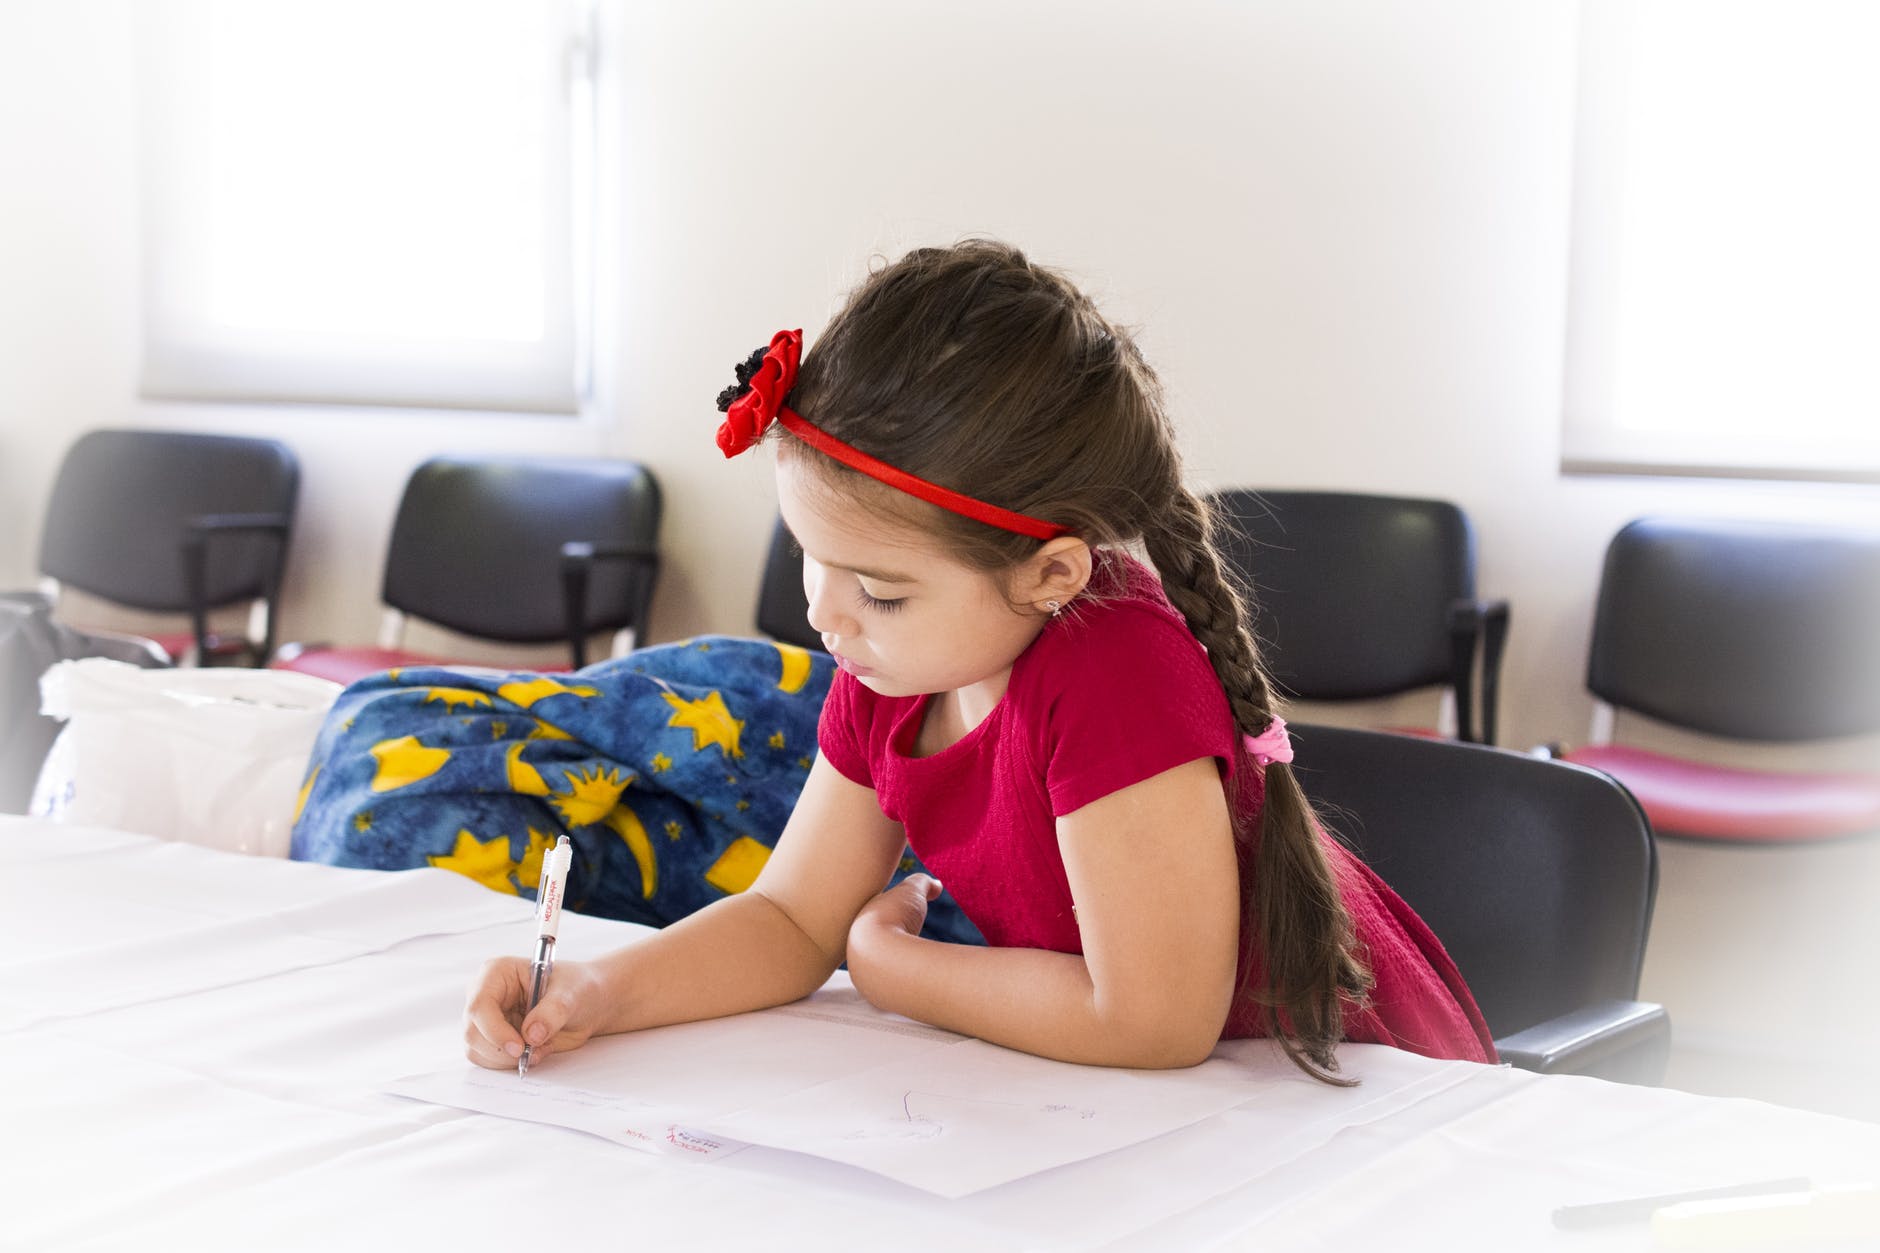 Helping Young Children Develop Strong Writing Skills